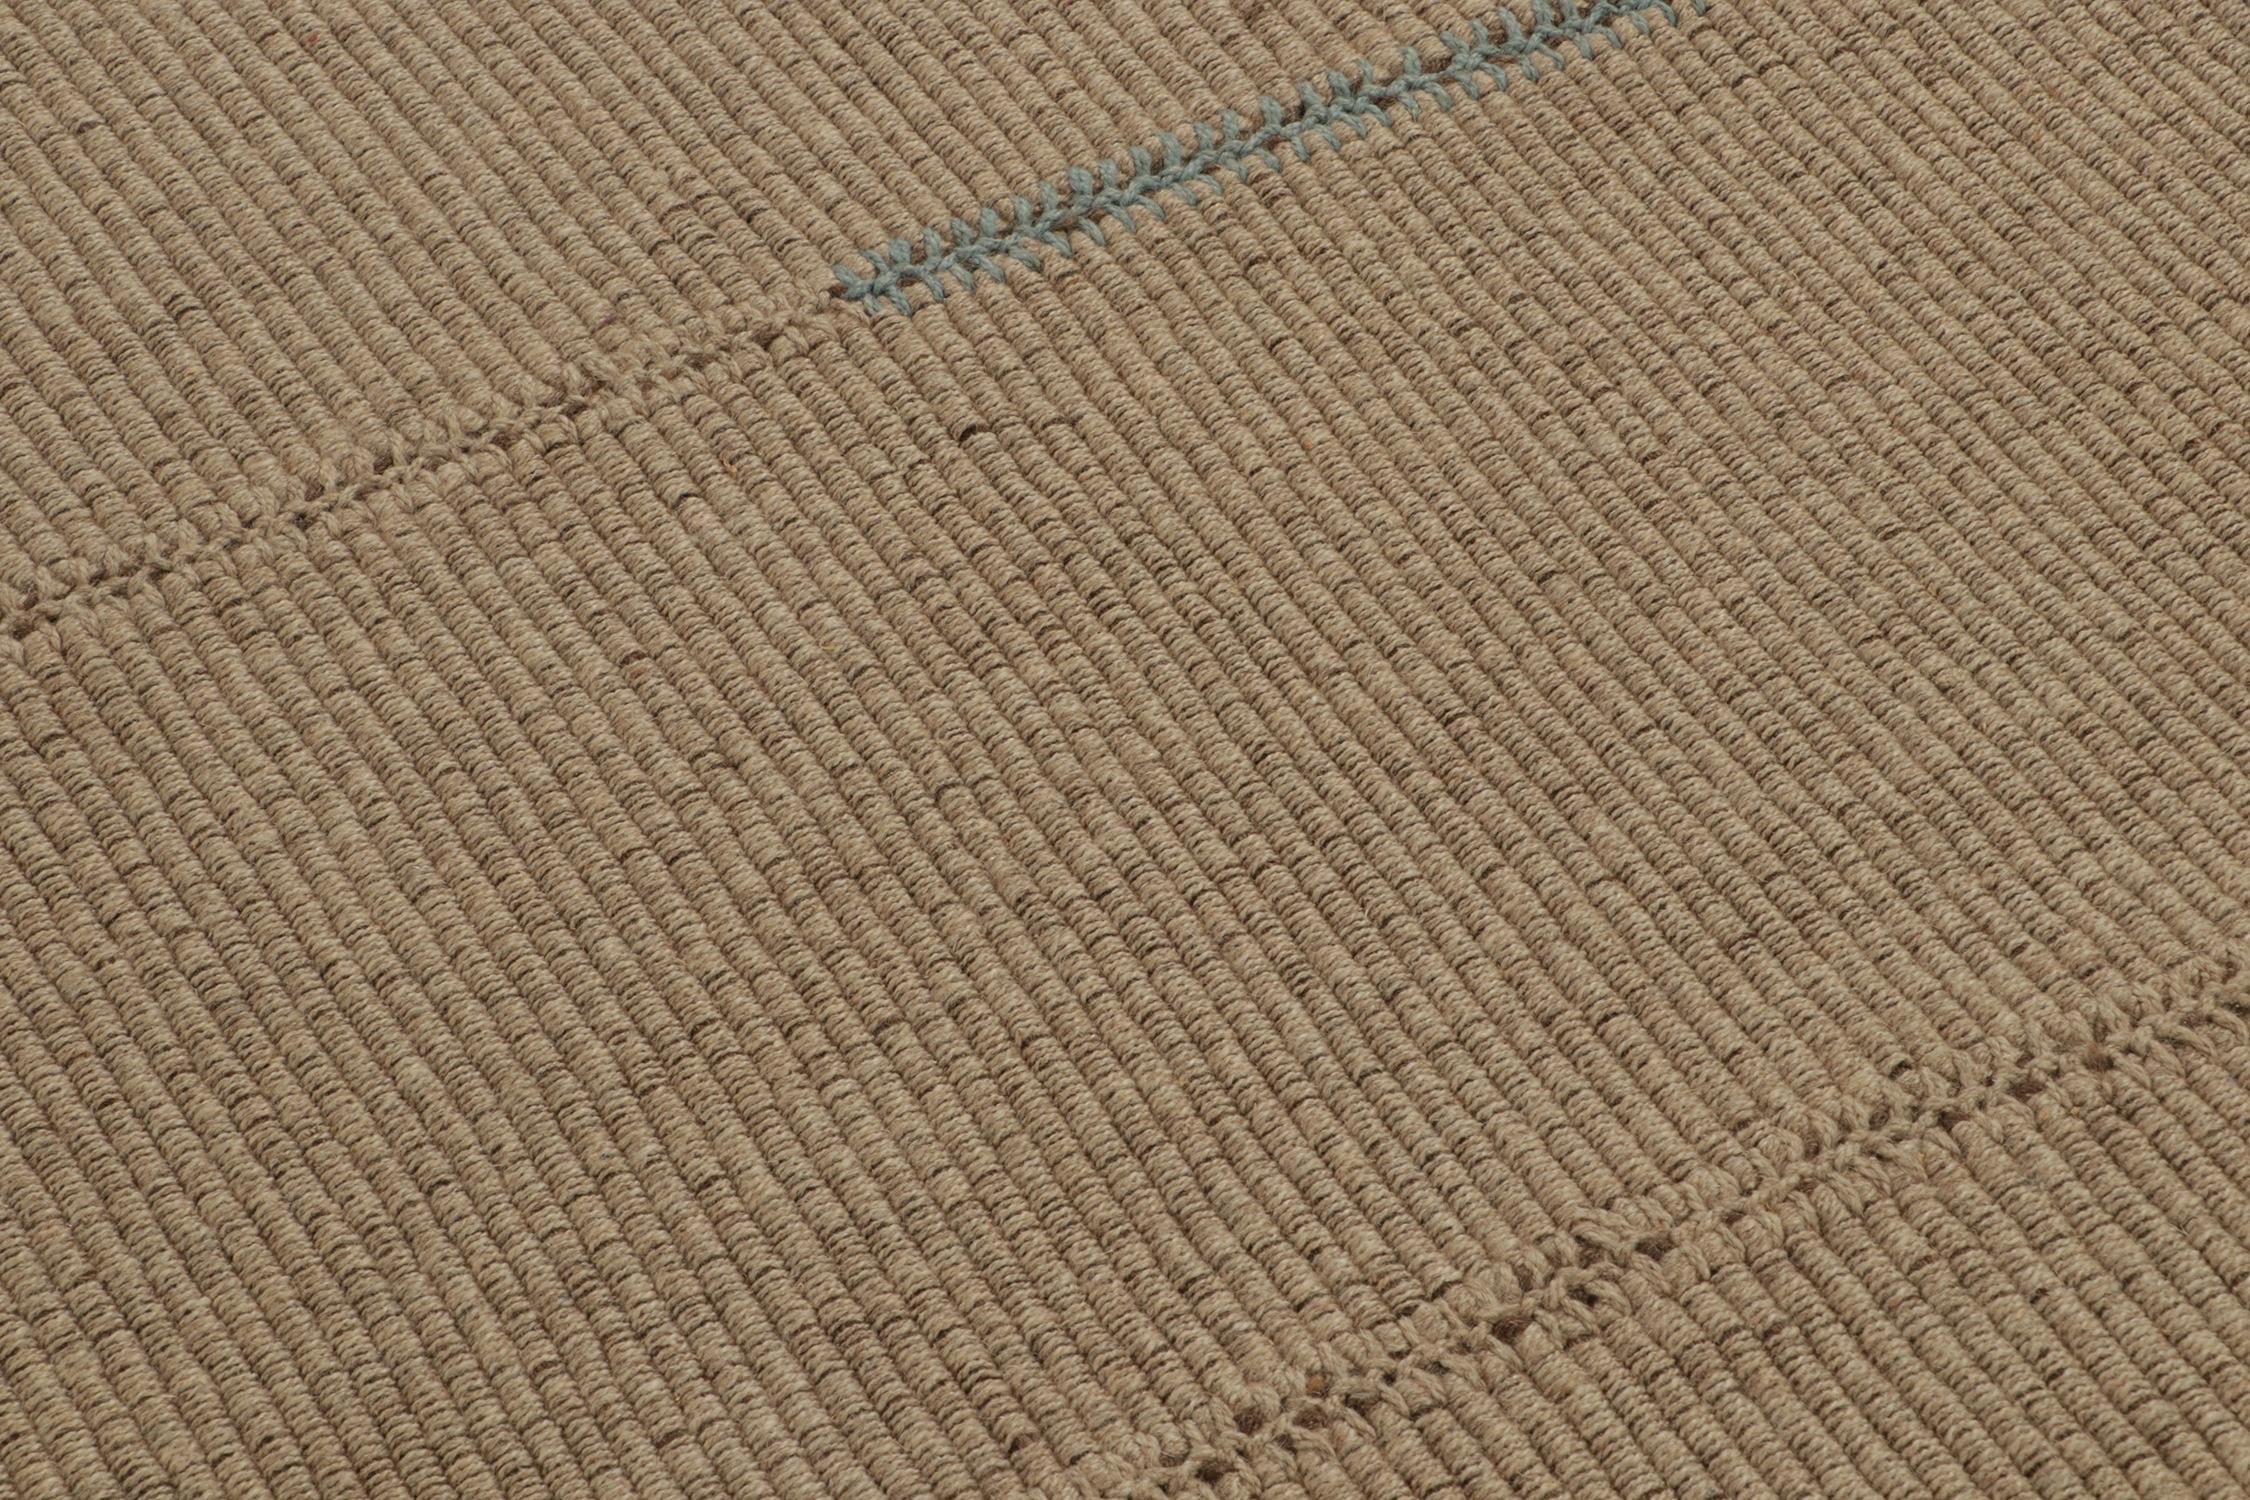 Rug & Kilim’s Contemporary Kilim in Beige with Blue Accents In New Condition For Sale In Long Island City, NY